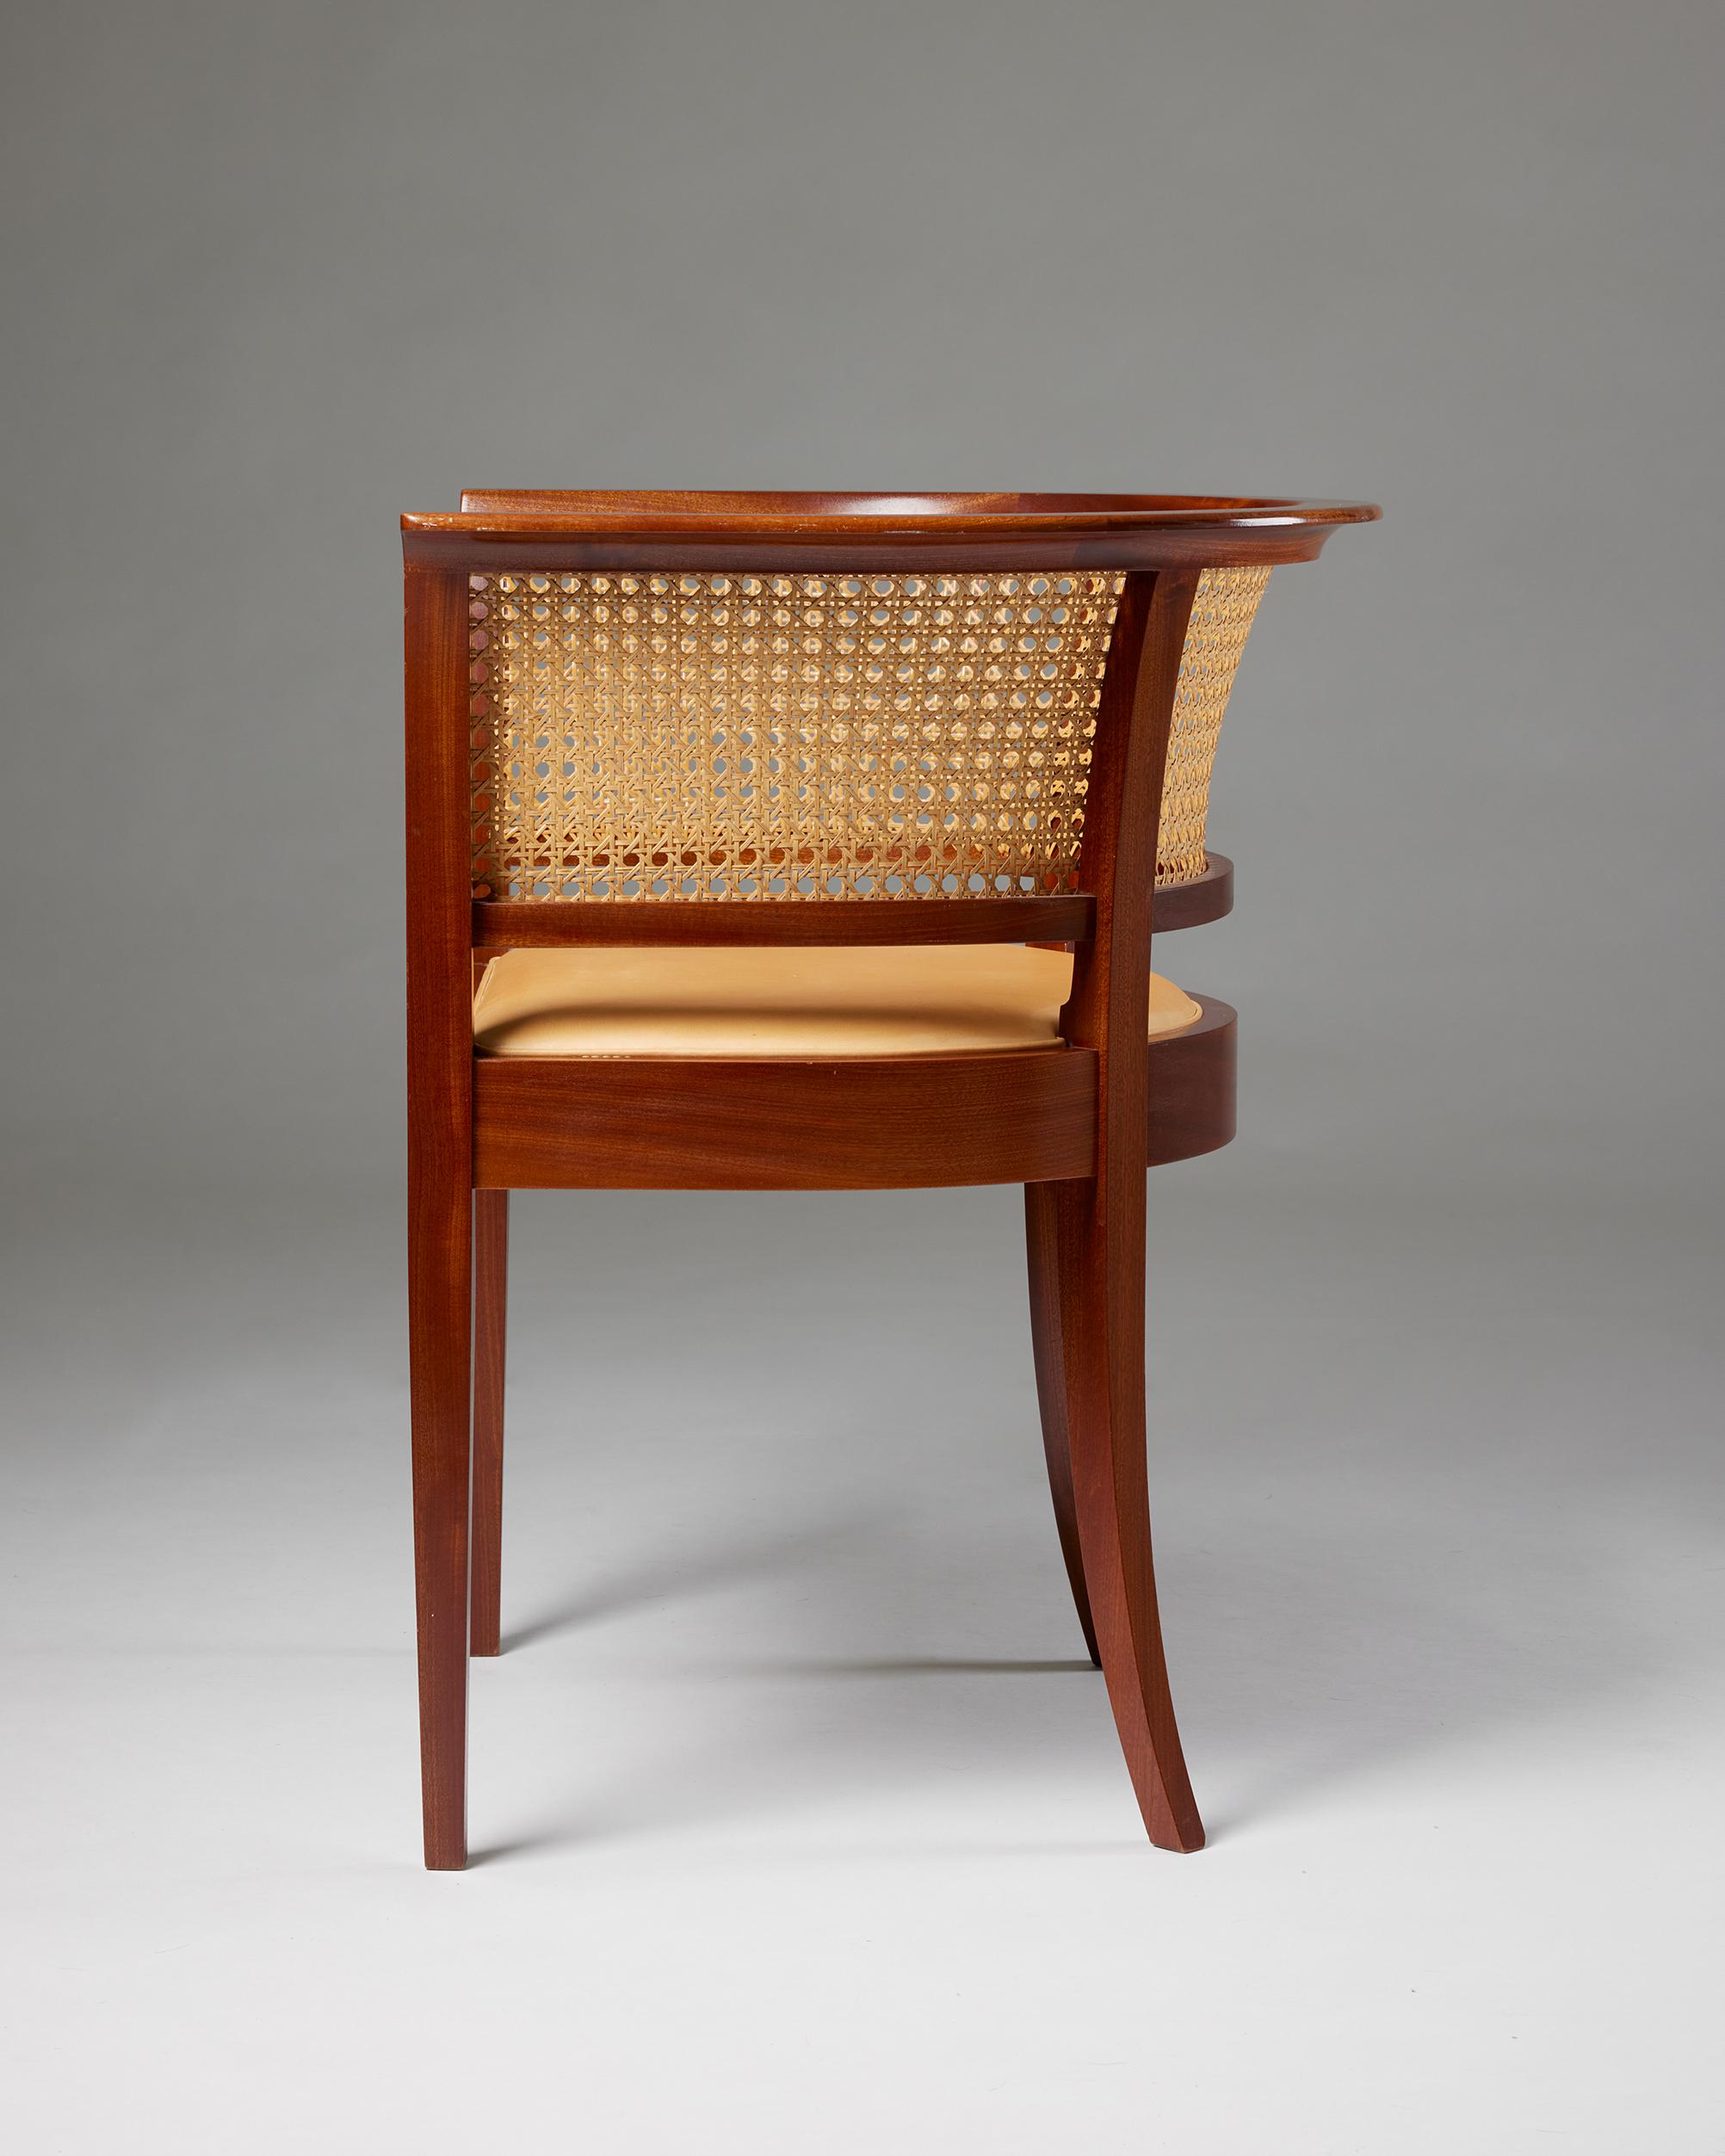 The Faaborg Chair